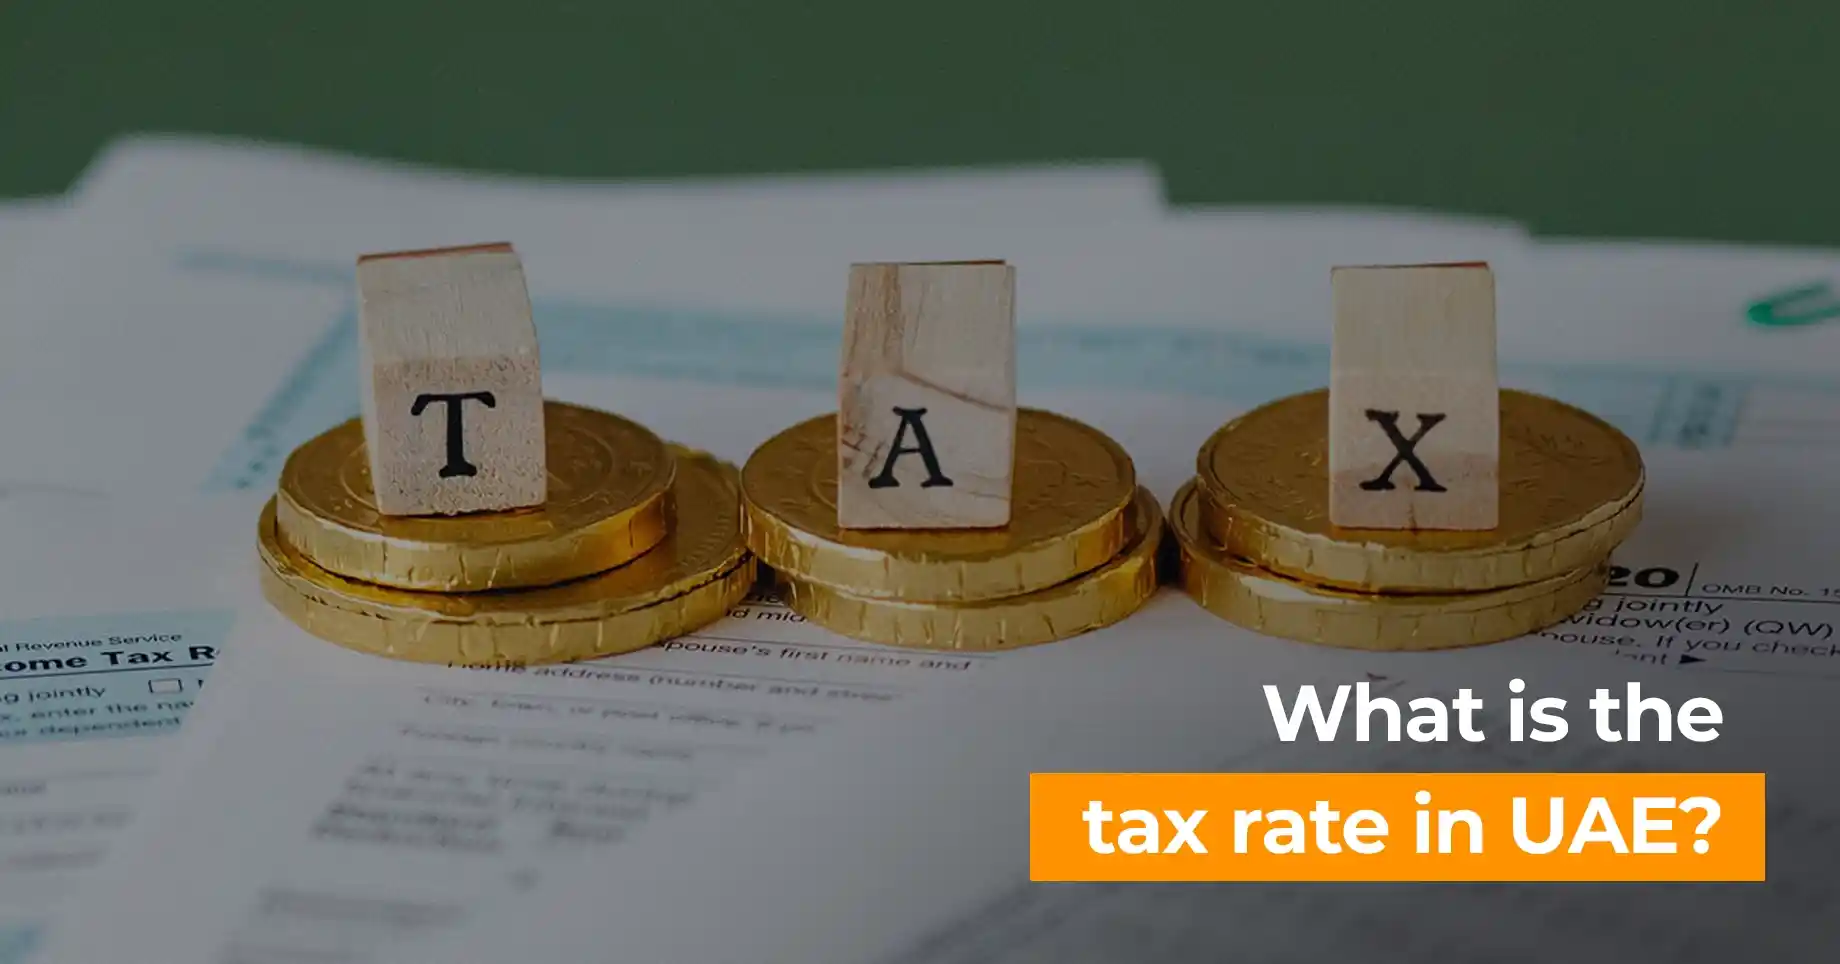 What is the tax rate in UAE